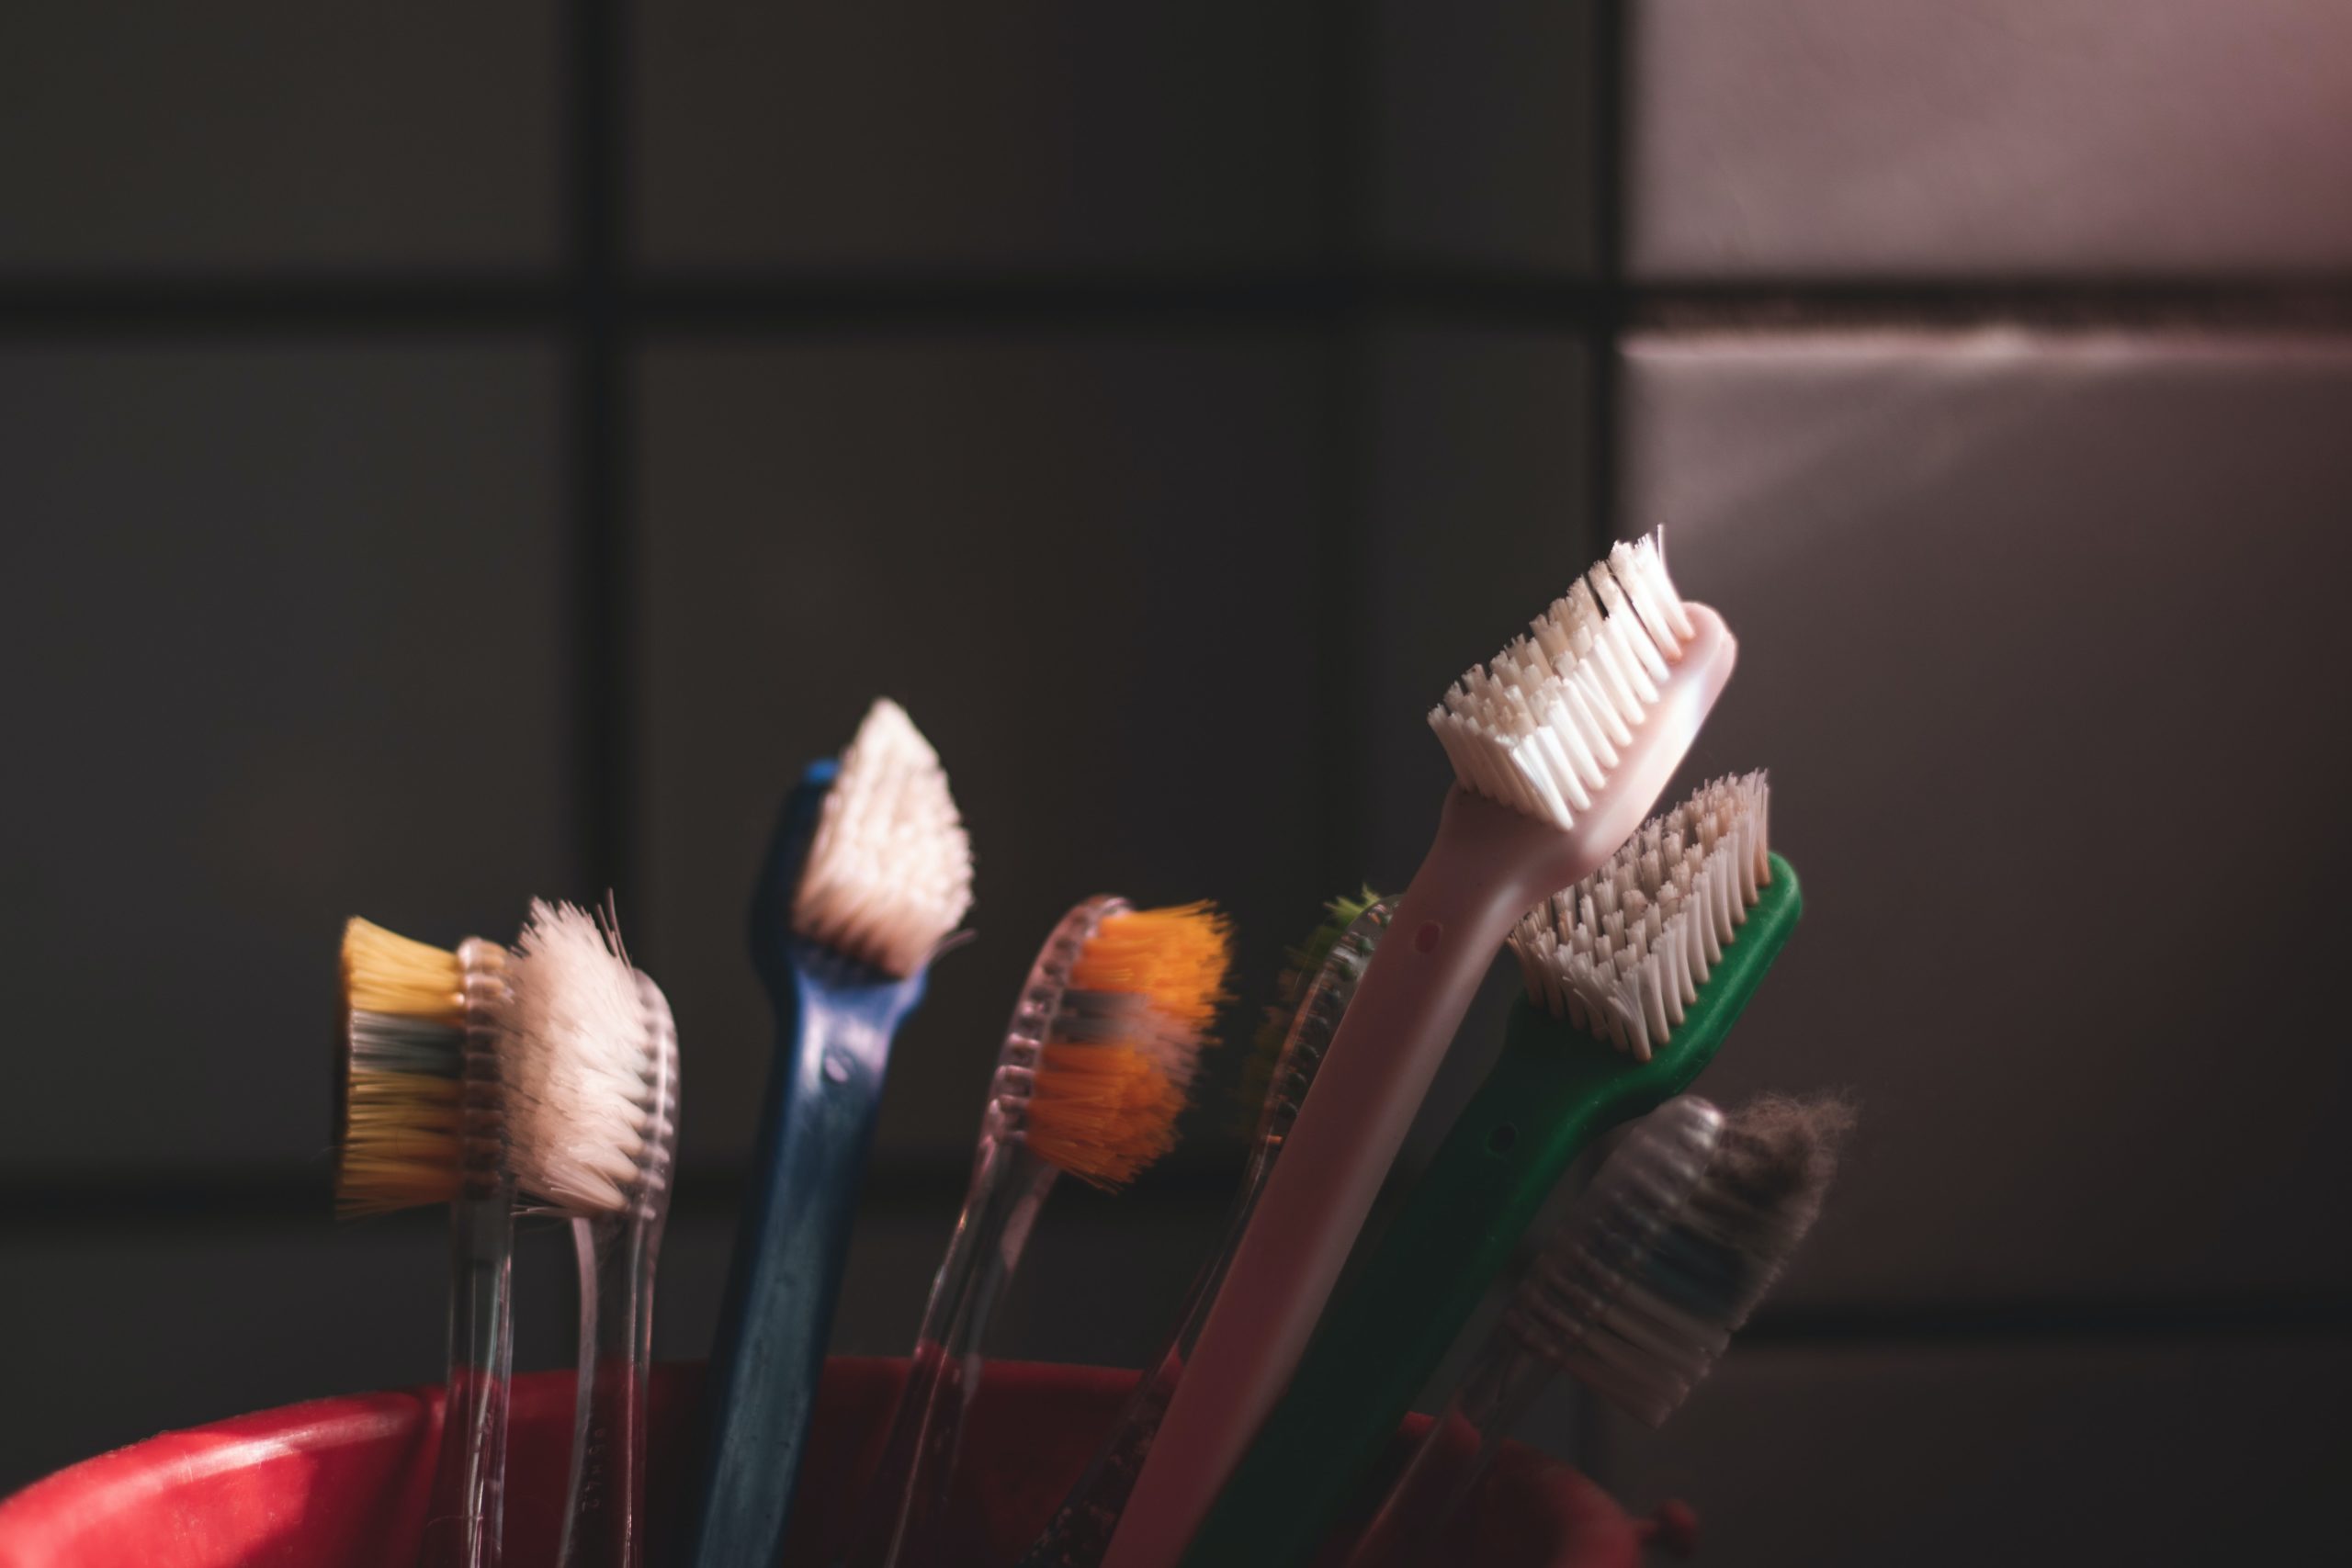 old toothbrushes stored together in dark space